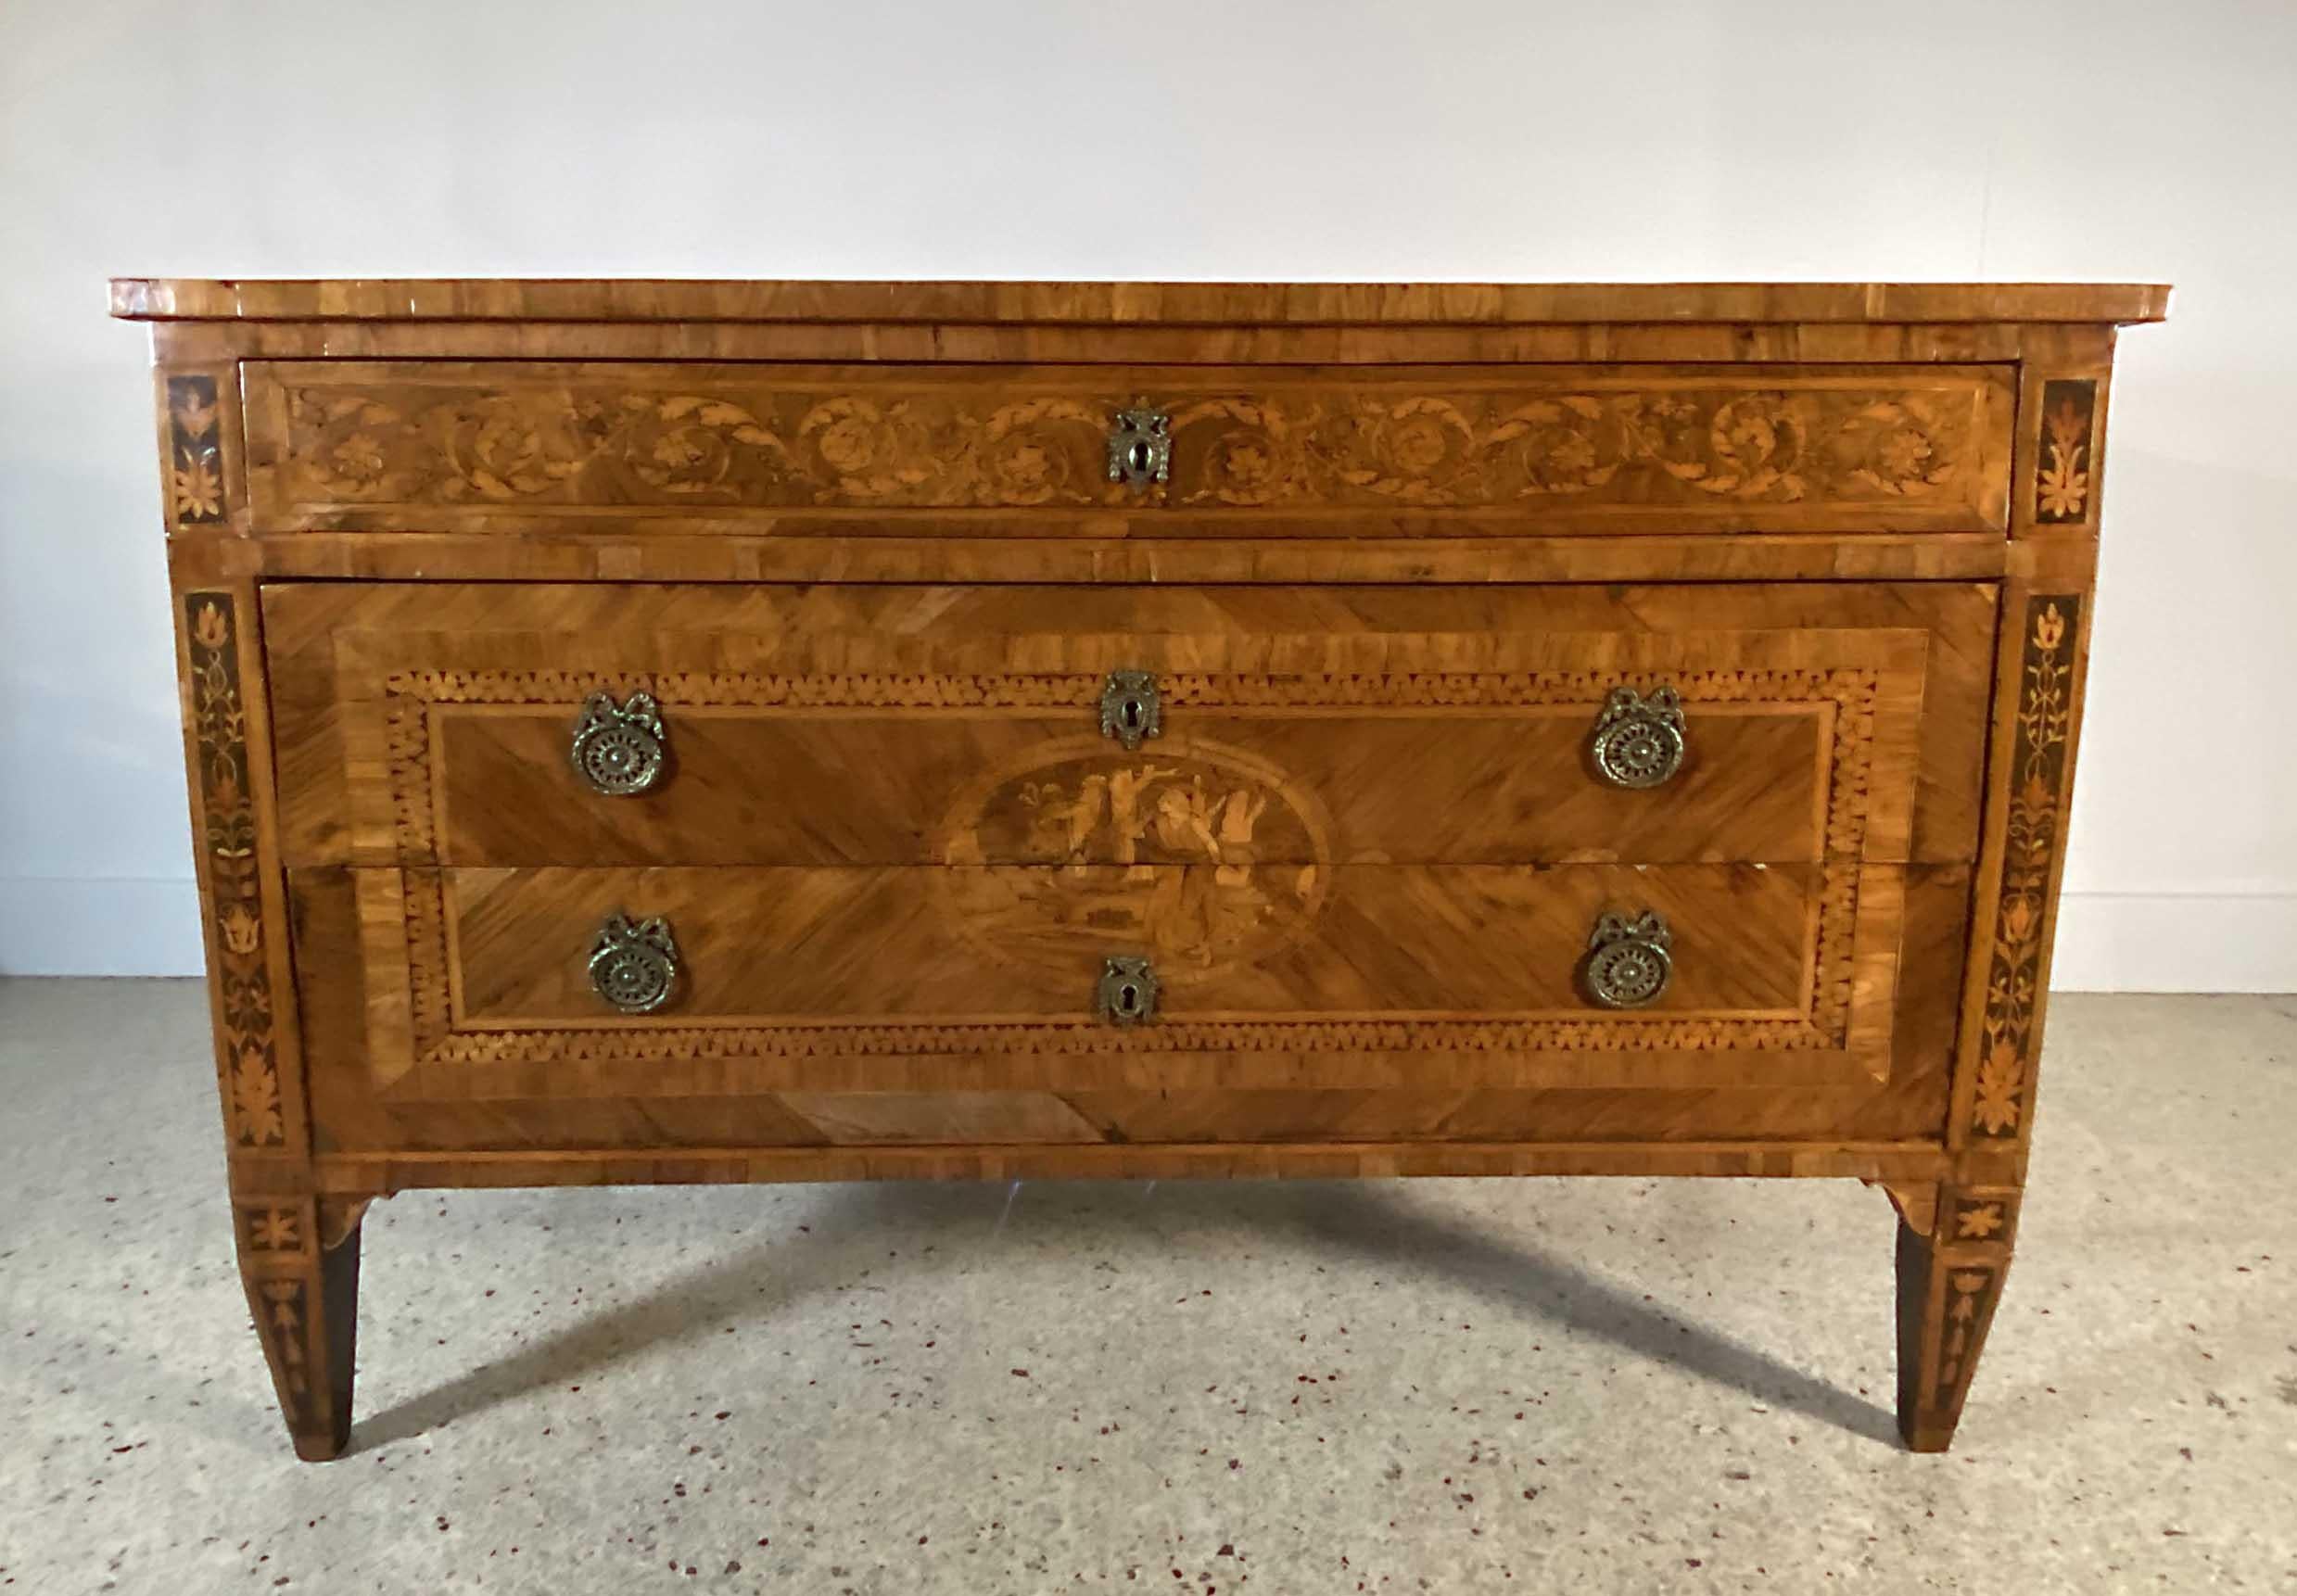 Fine Italian Neoclassic Walnut and Lemonwood Inlaid Commode, Guiseppe Maggiolini In Good Condition For Sale In Hollywood, FL